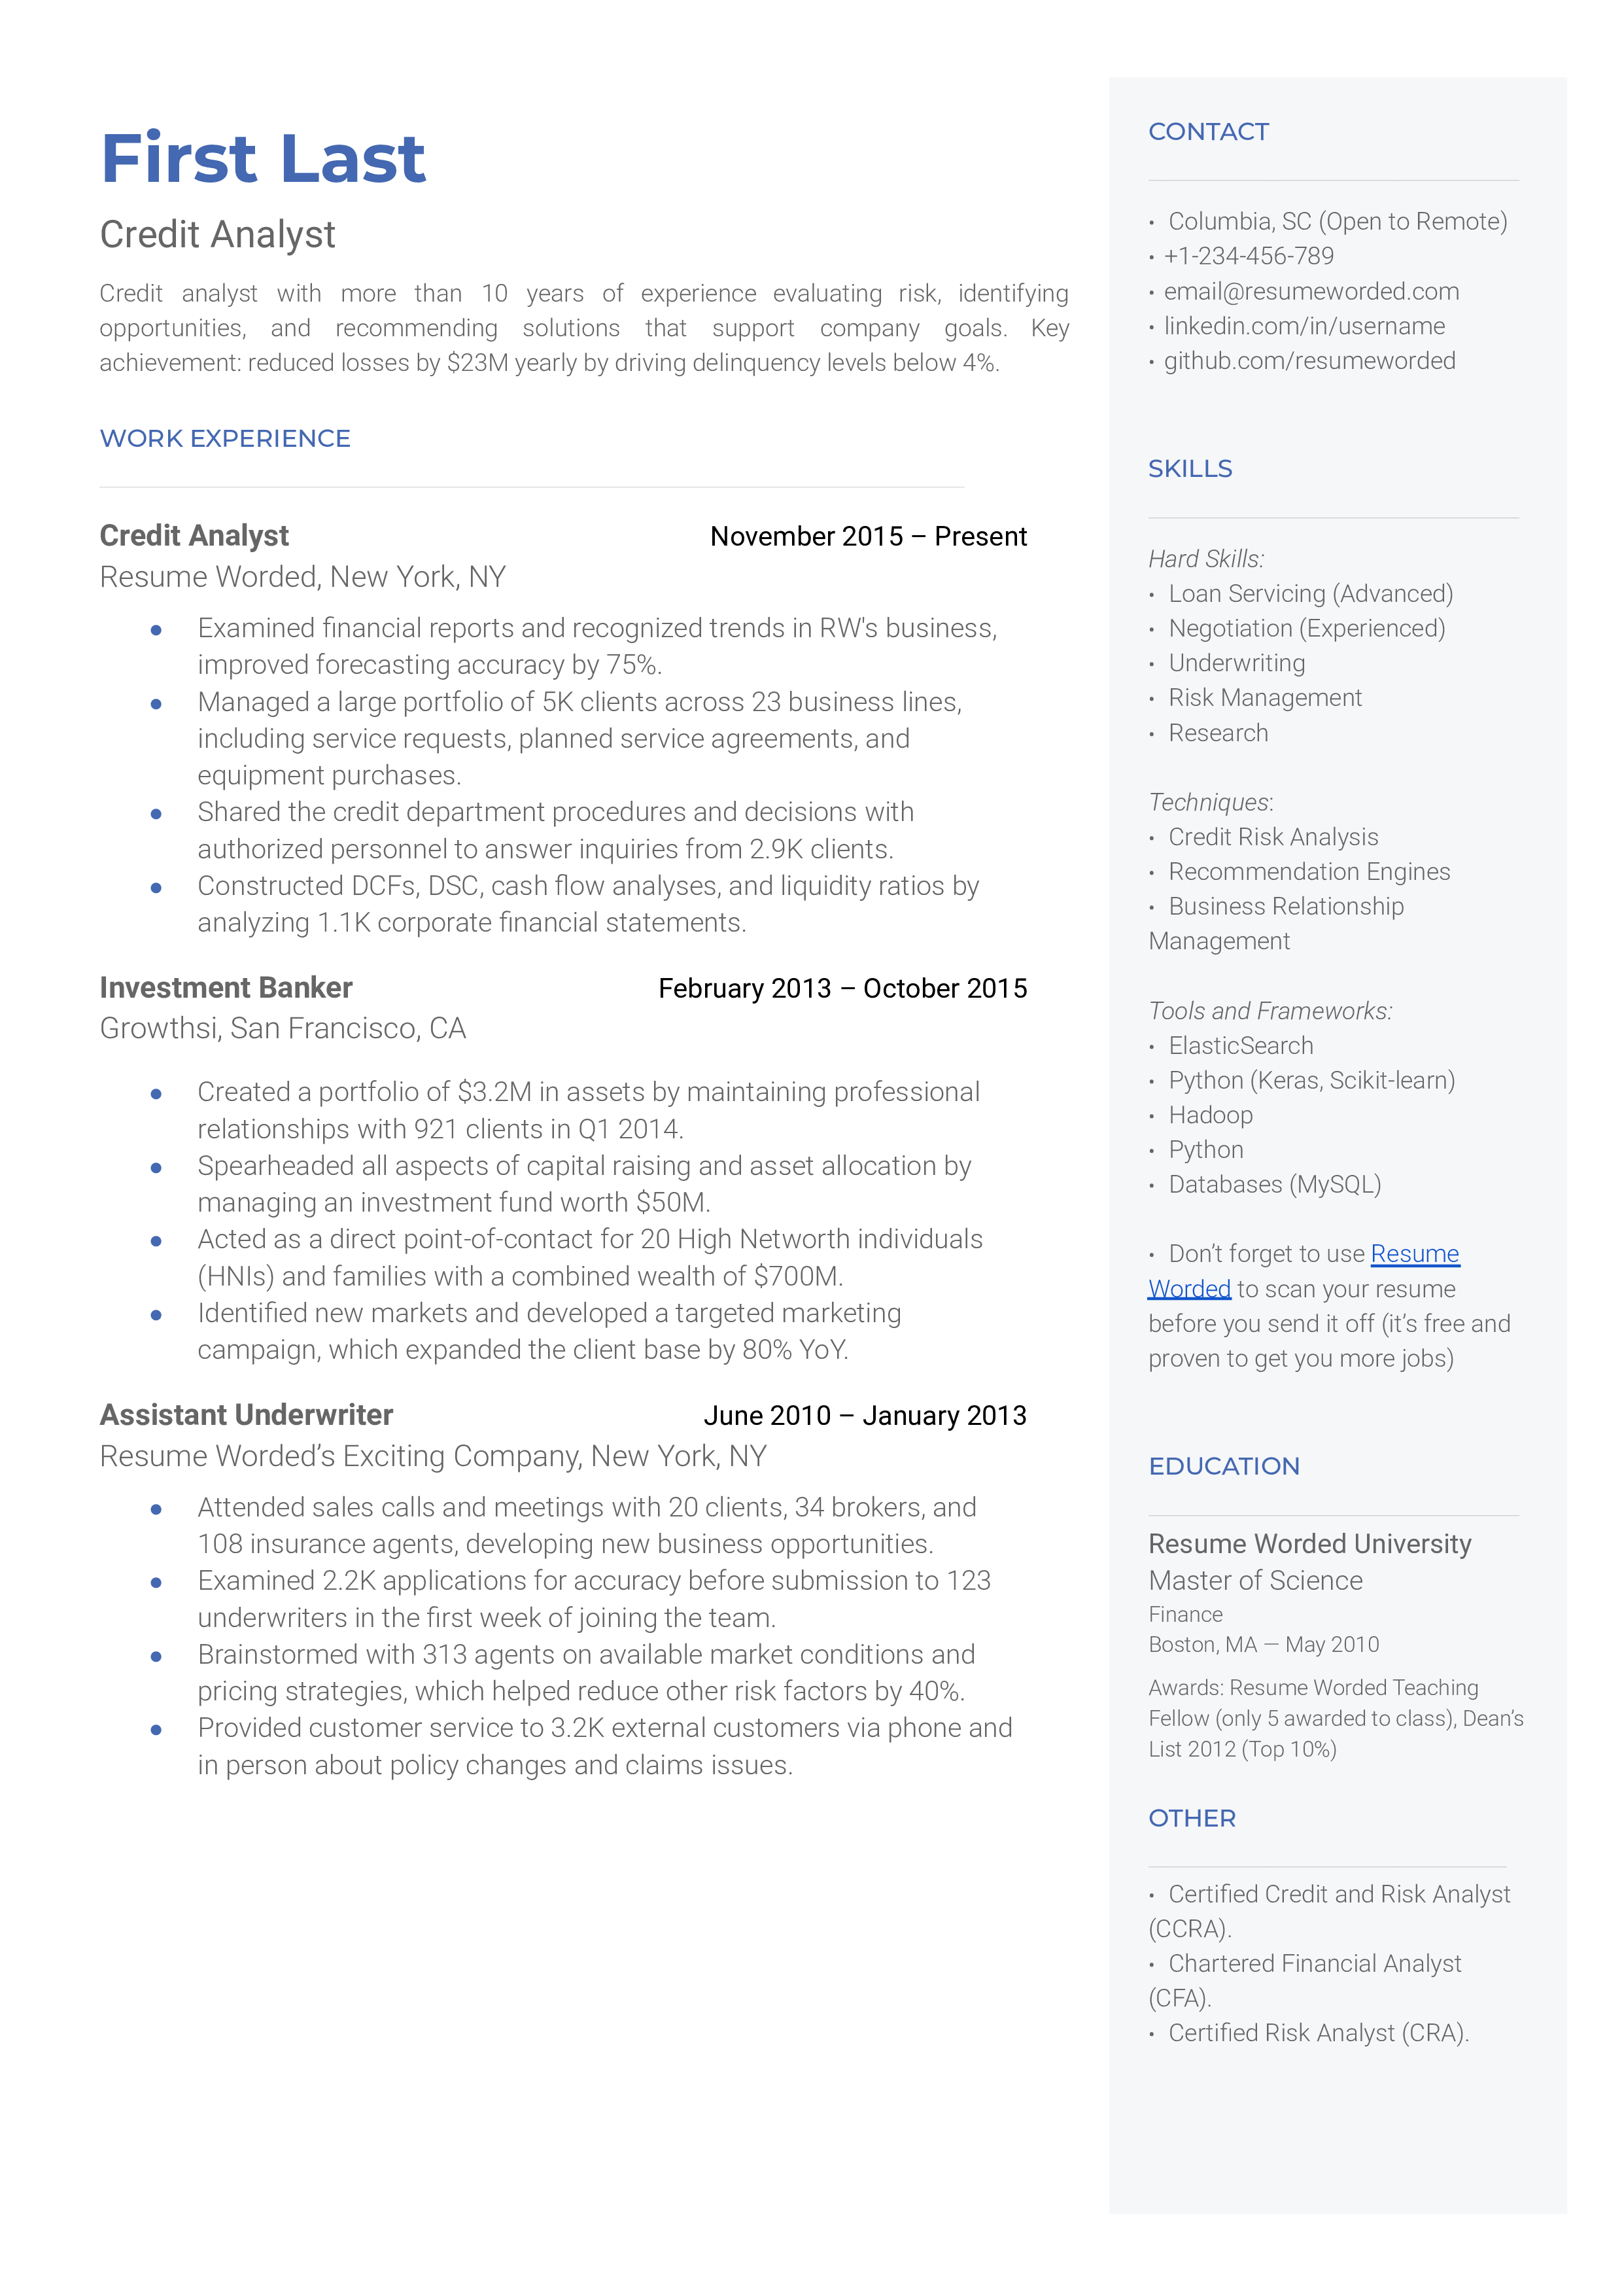 A credit analyst resume template that uses strong metrics to illustrate achievements 